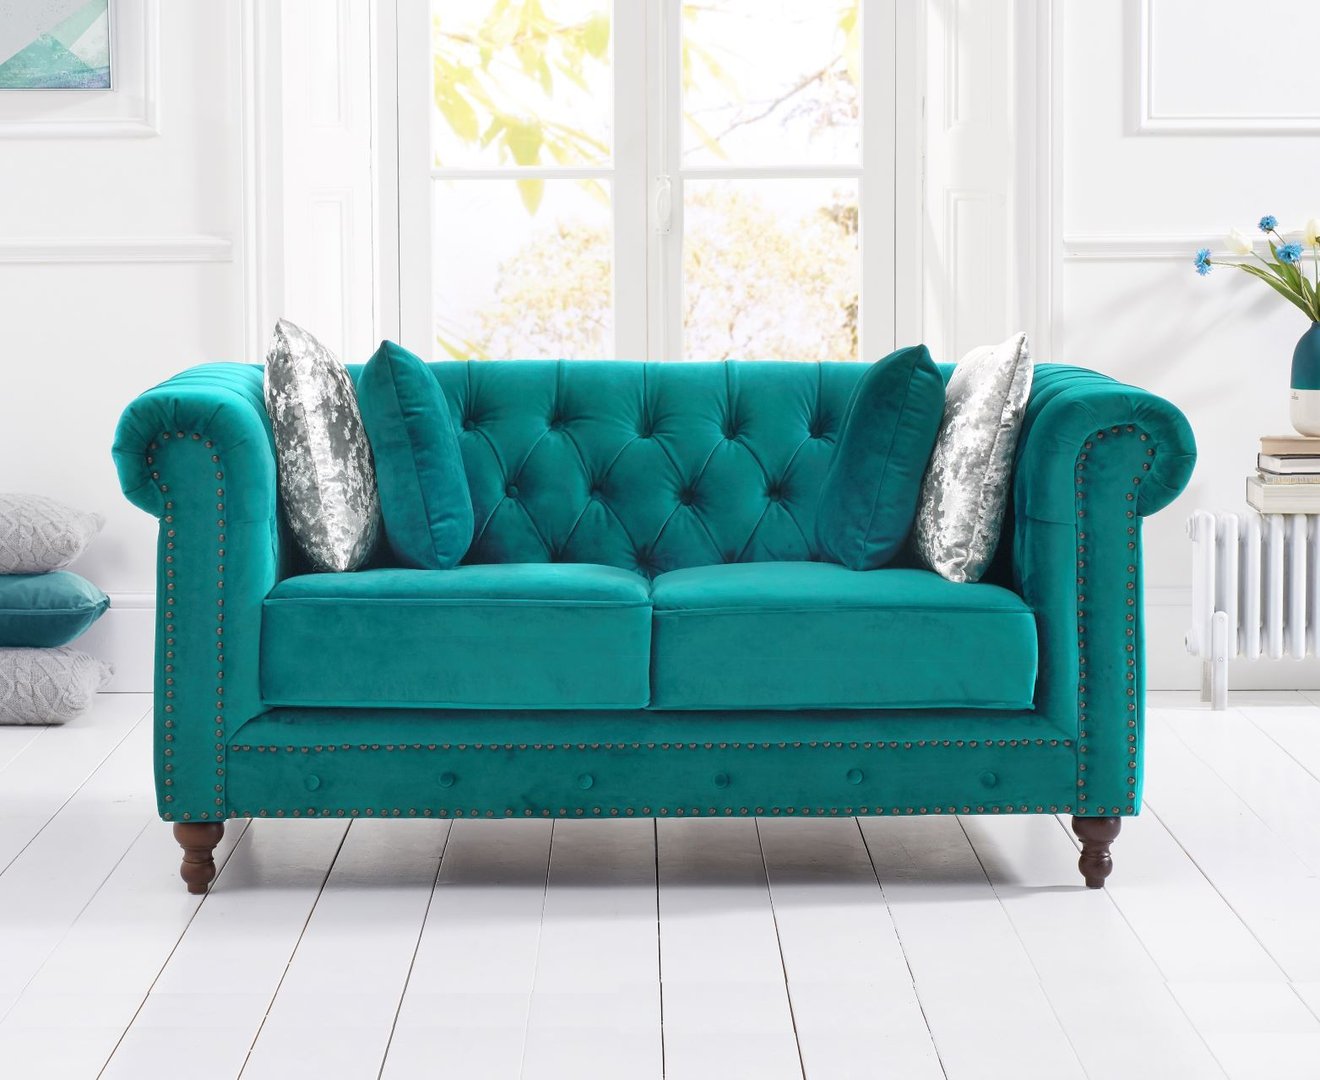 Stylish teal velvet 2 seater sofa with stud detail